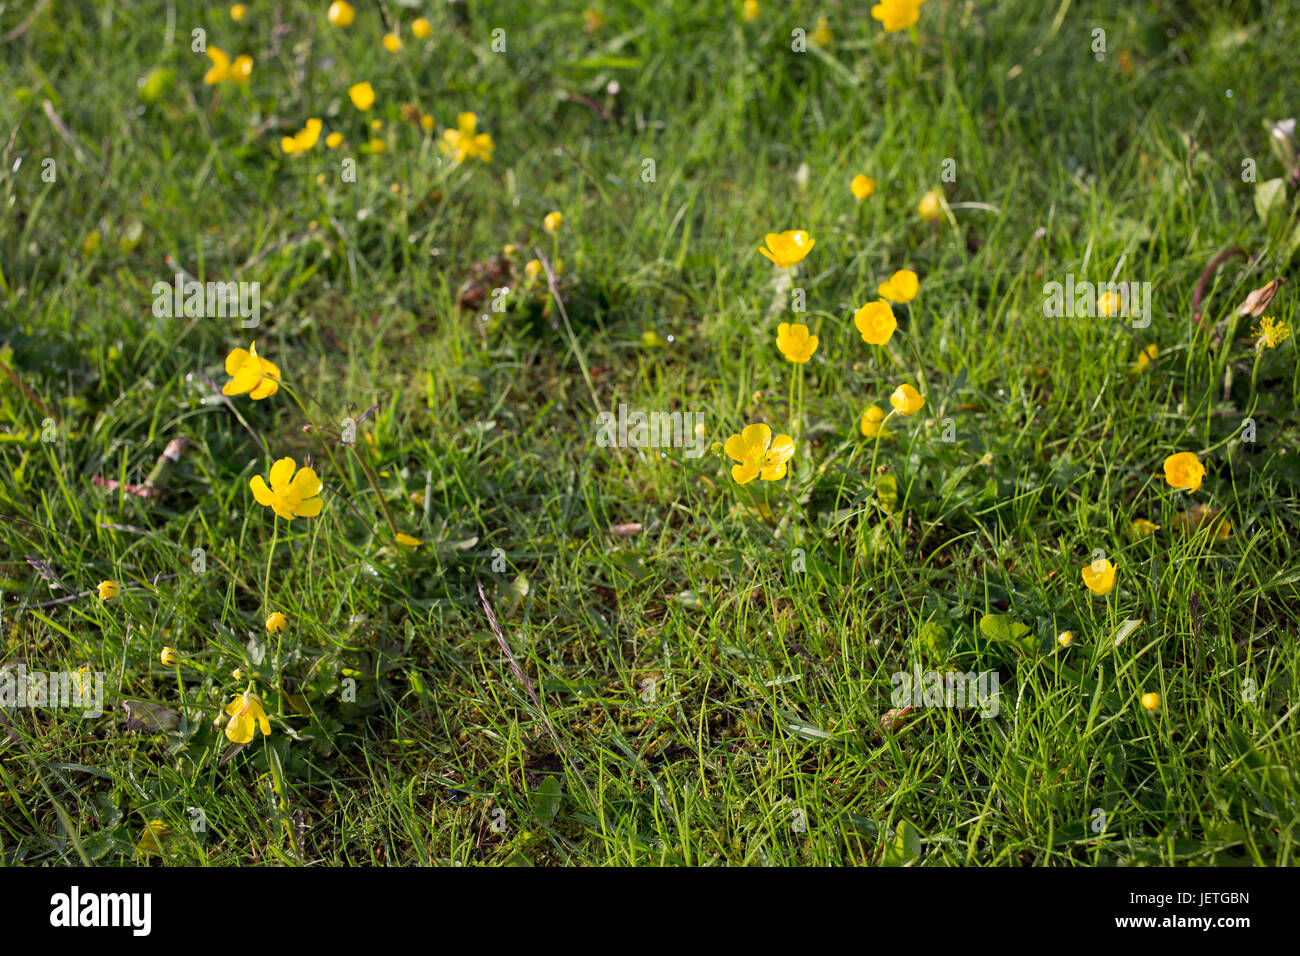 Background with green grass and flowers of Creeping Buttercup (Ranunculus repens) Stock Photo